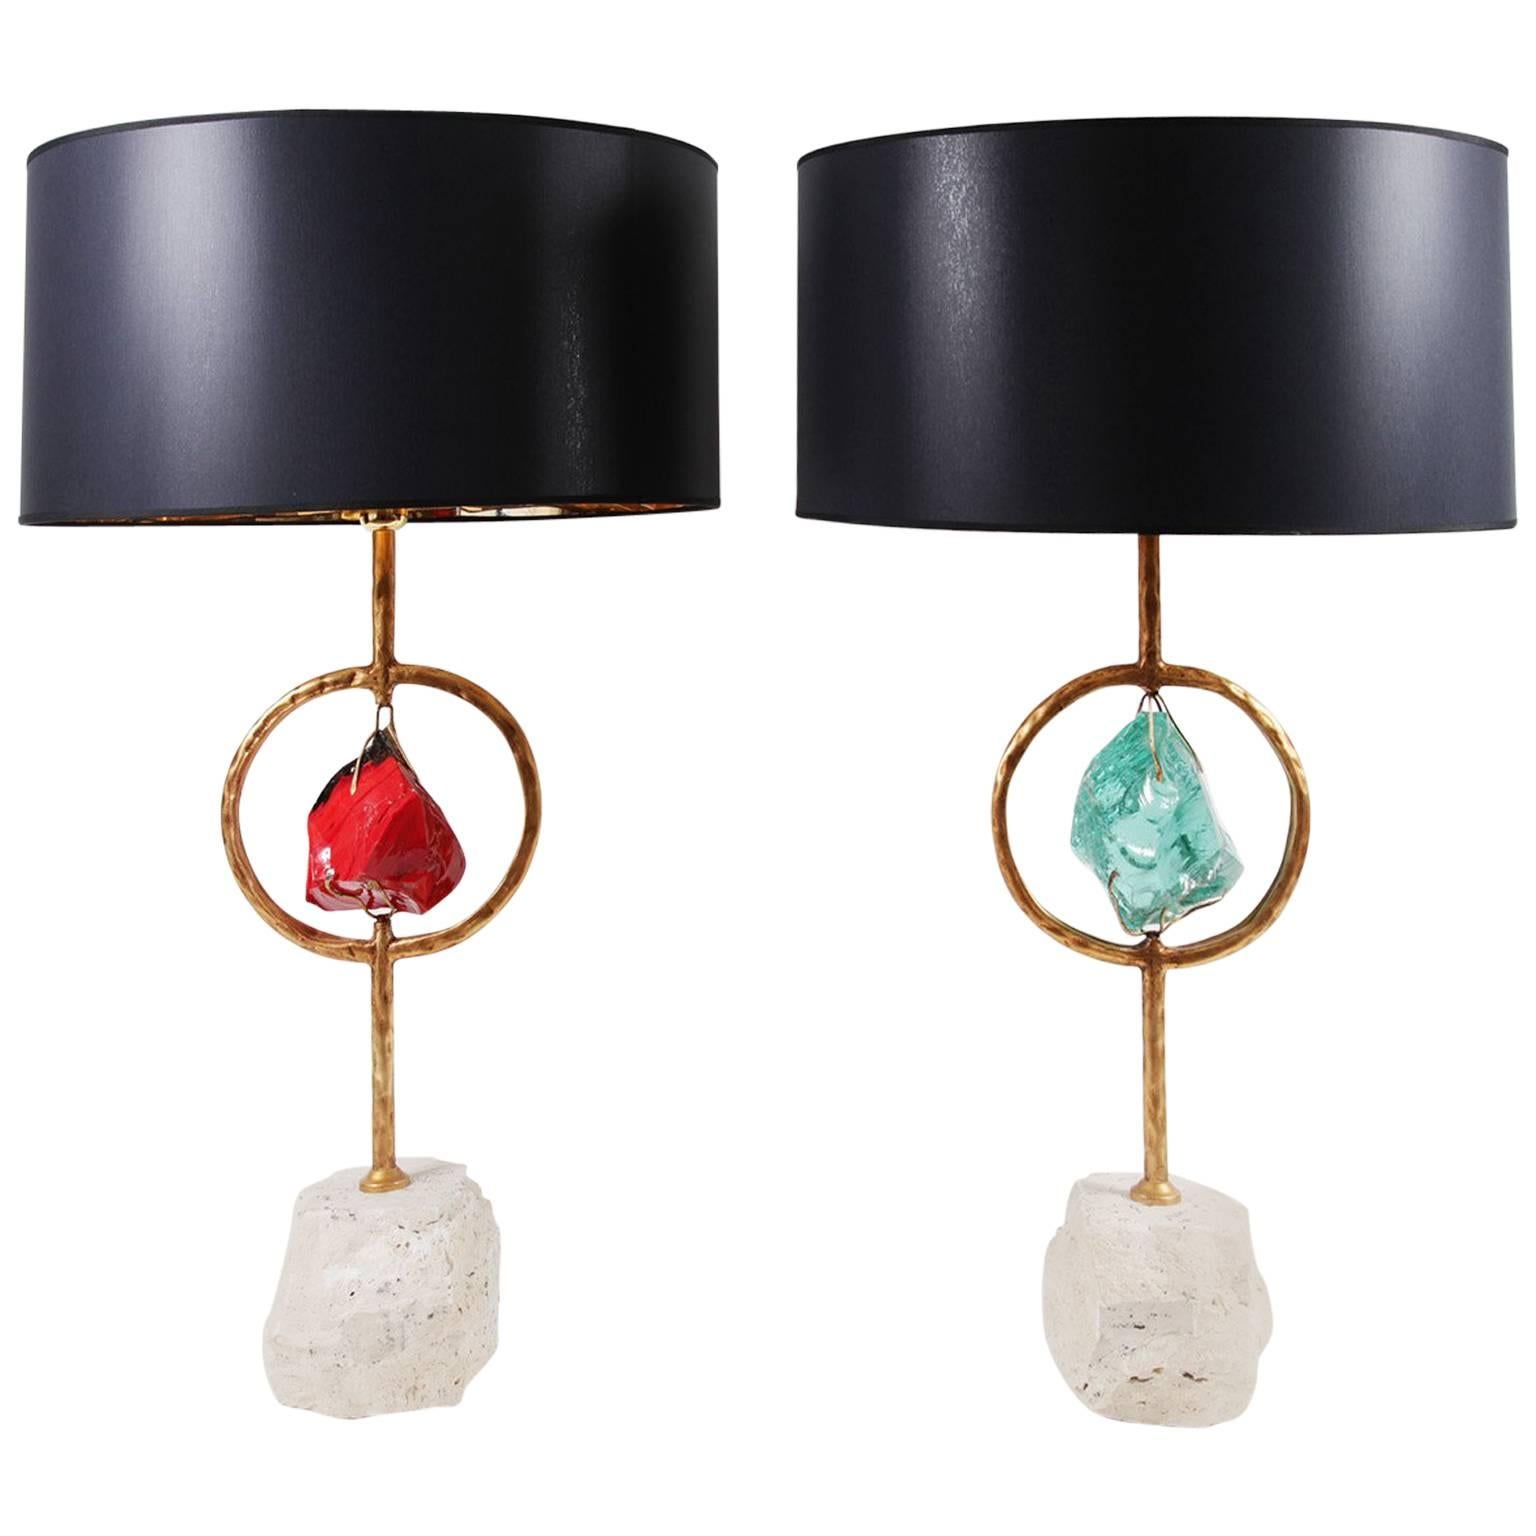 Pair of Brass, Crystal and Travertine Stone Table Lamps by Michele Notte, 2012